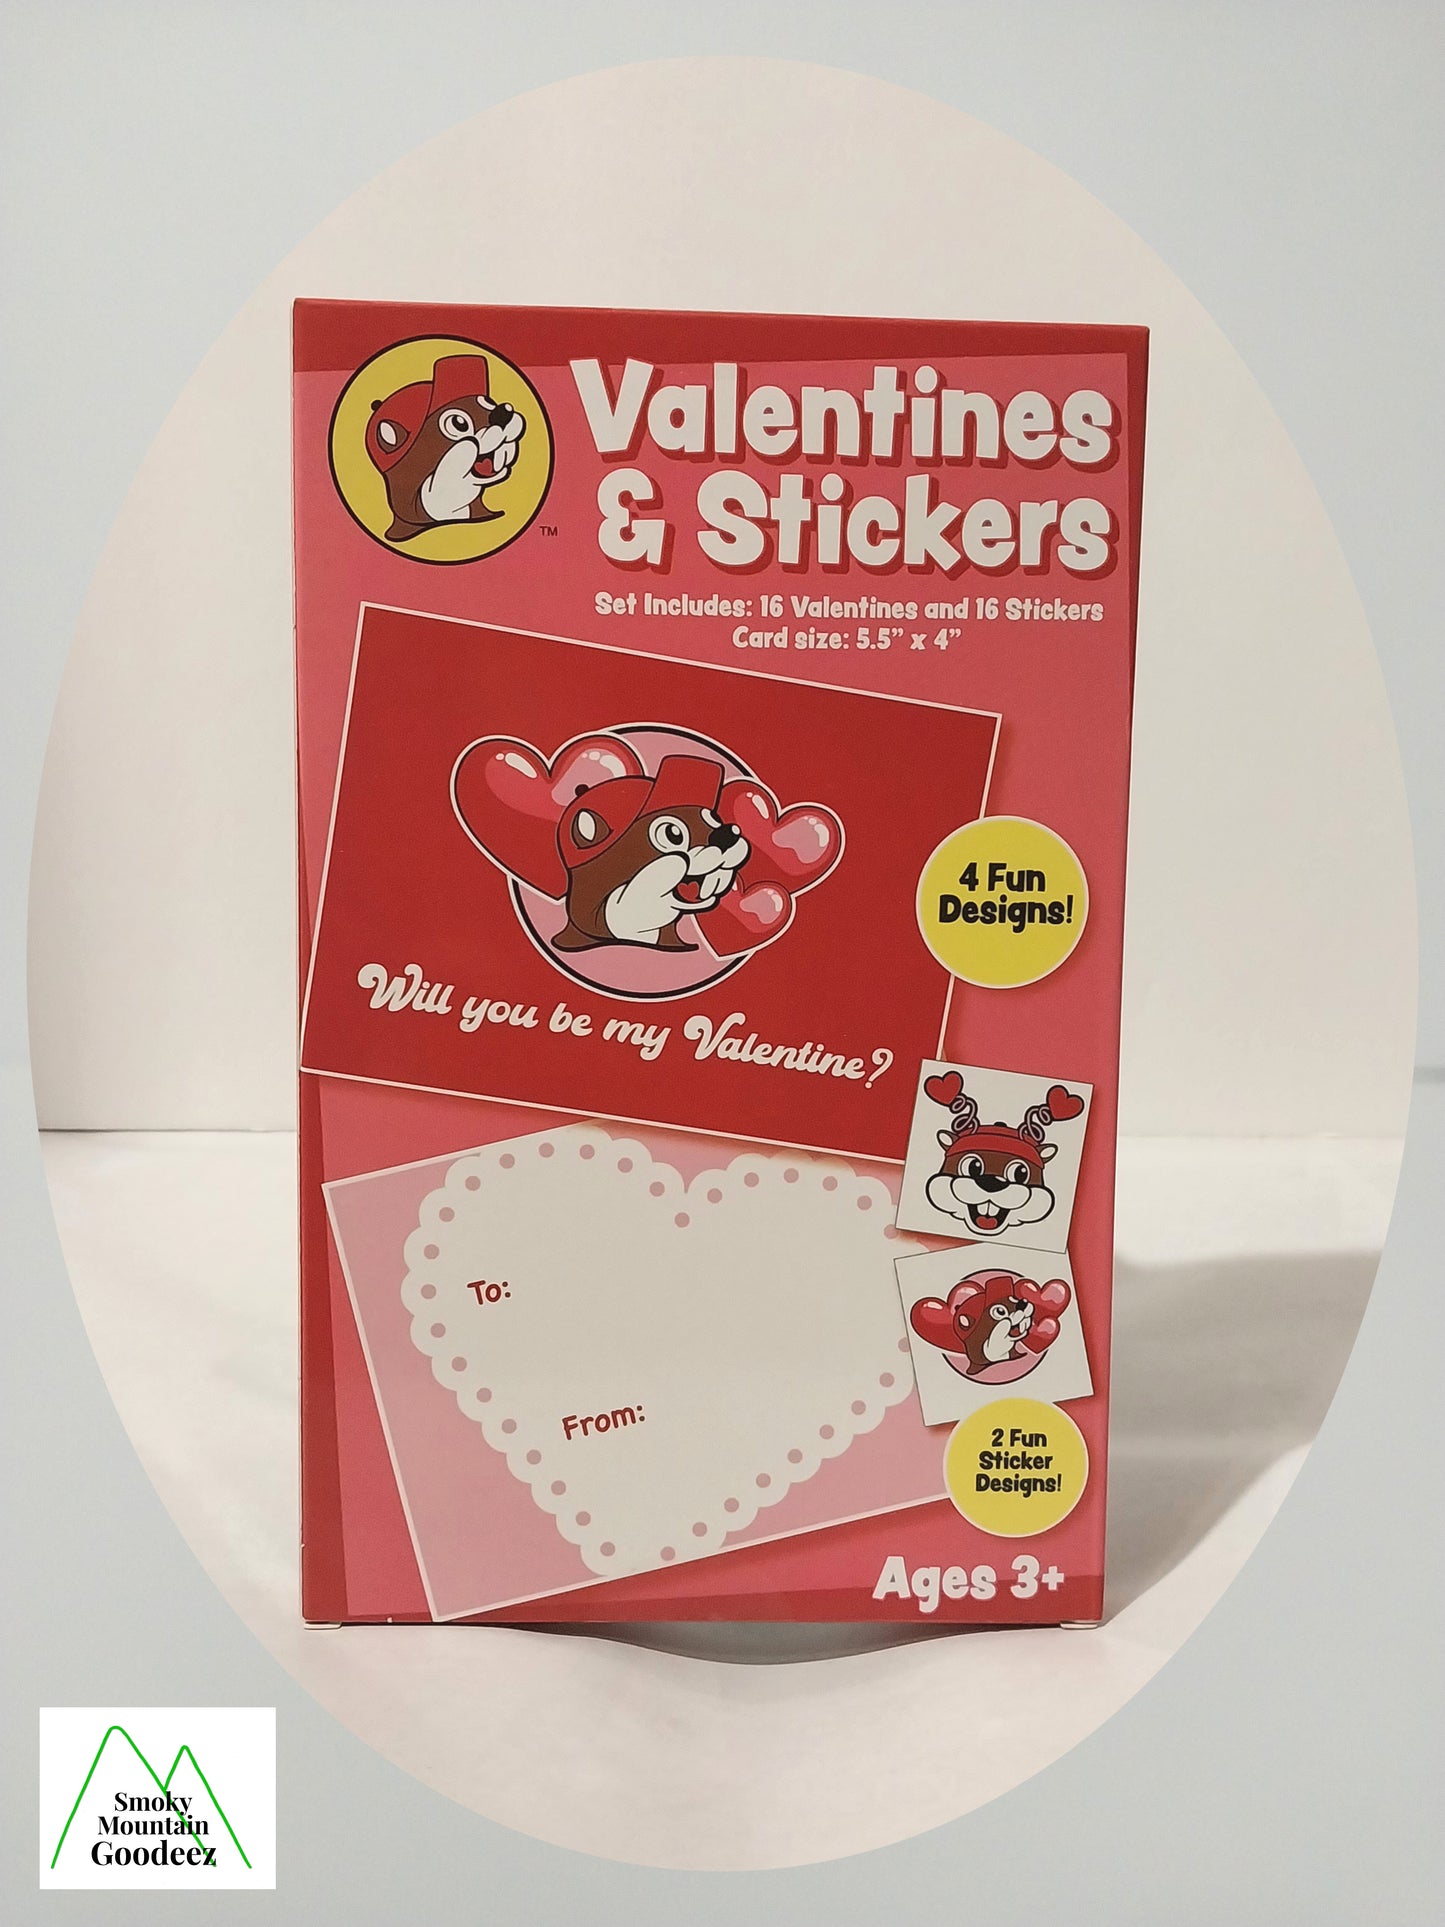 Buc-ee Lovers Pack of Valentine's and Stickers